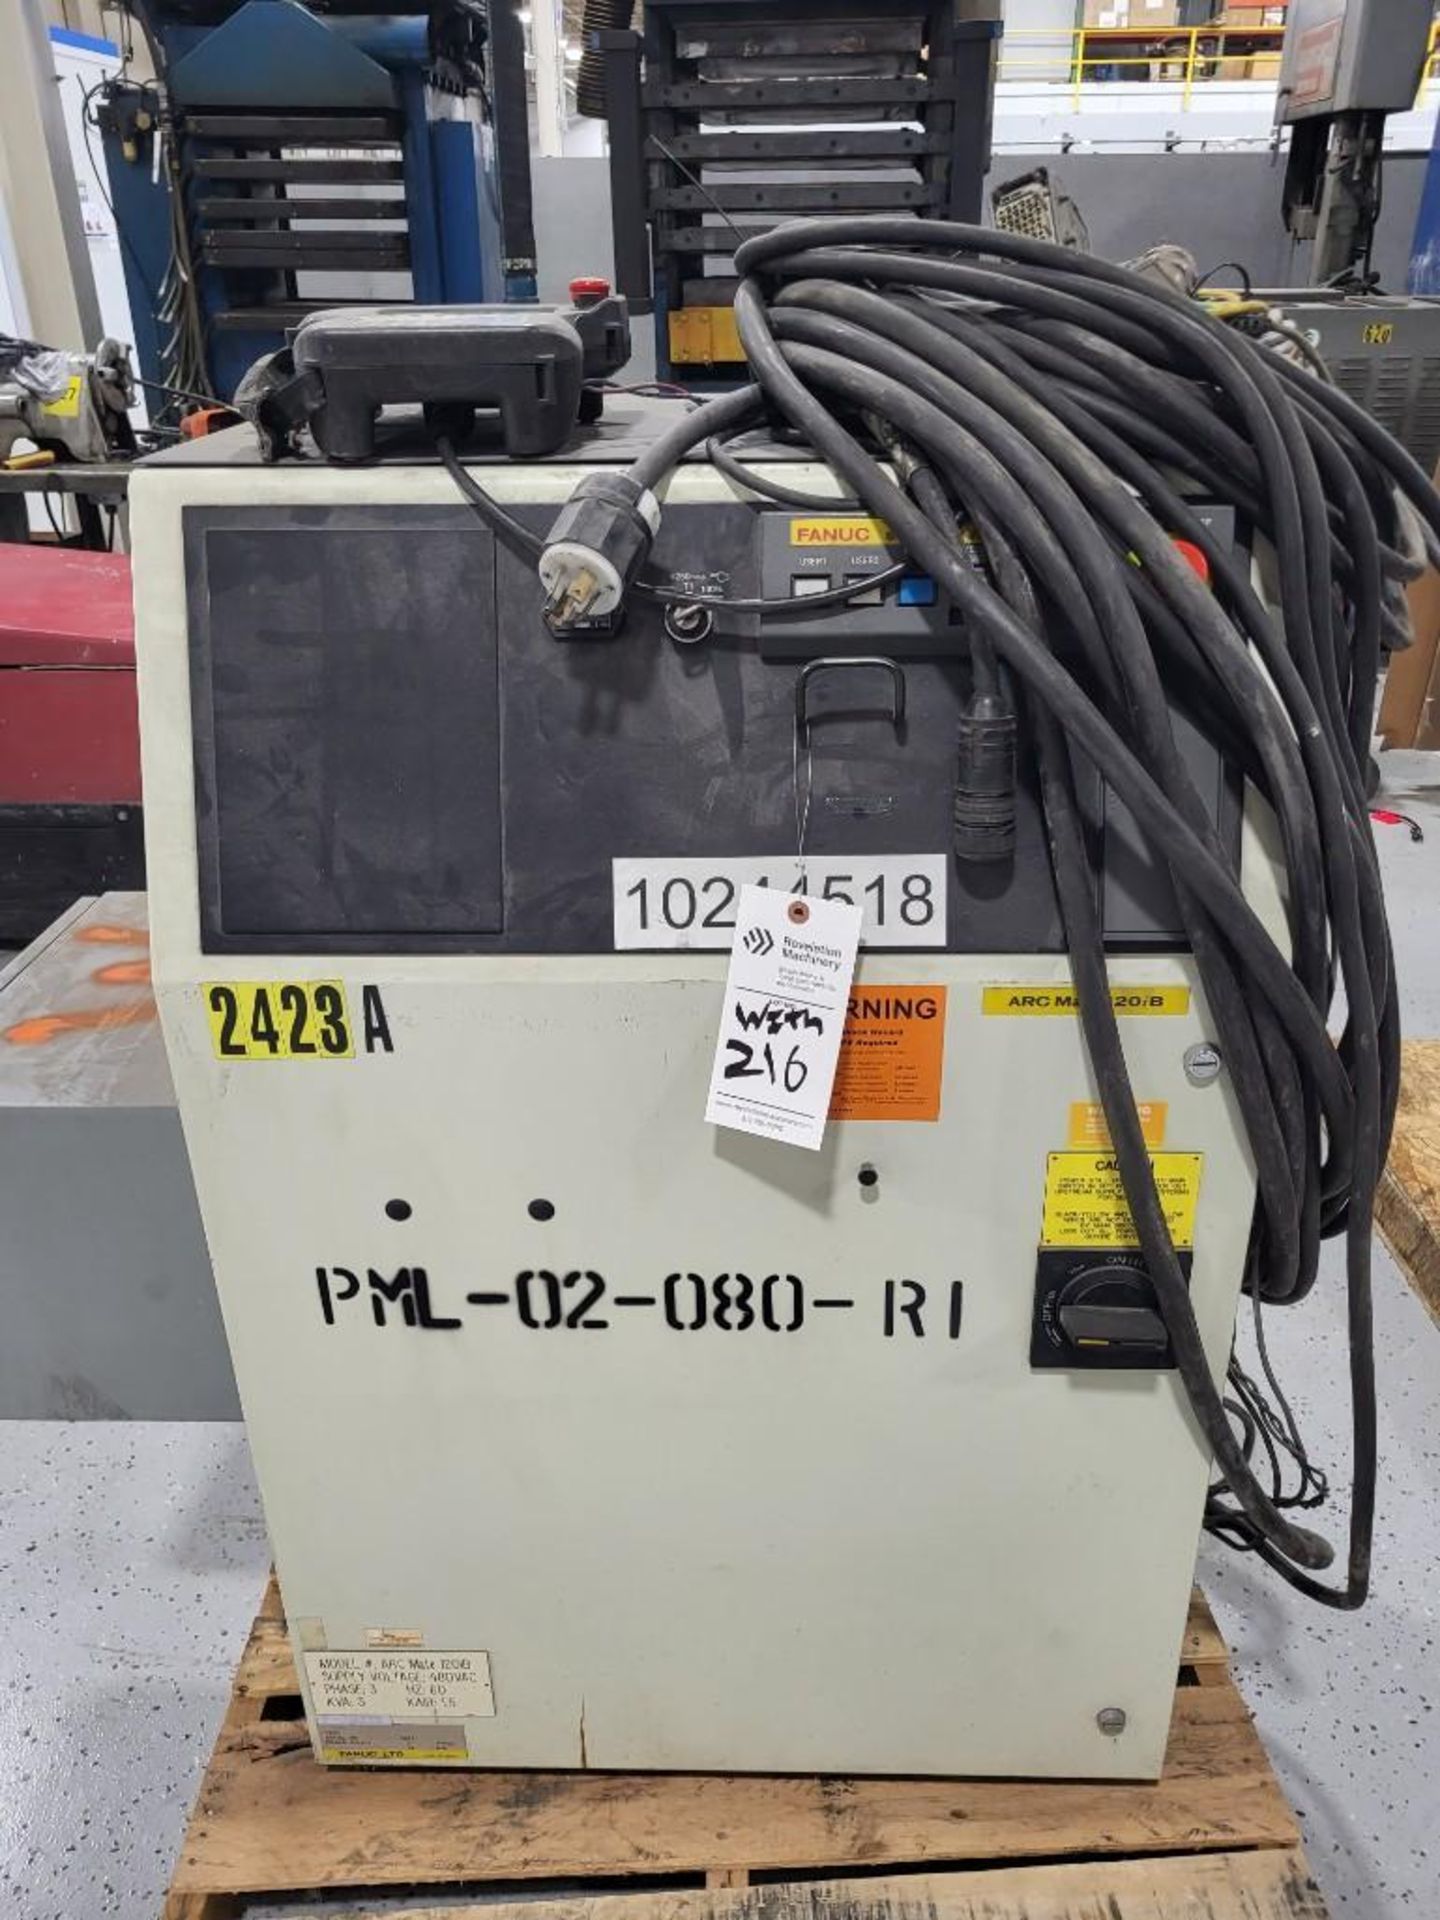 FANUC / LINCOLN ELECTRIC ROBOTIC WELDING CELL - Image 16 of 32